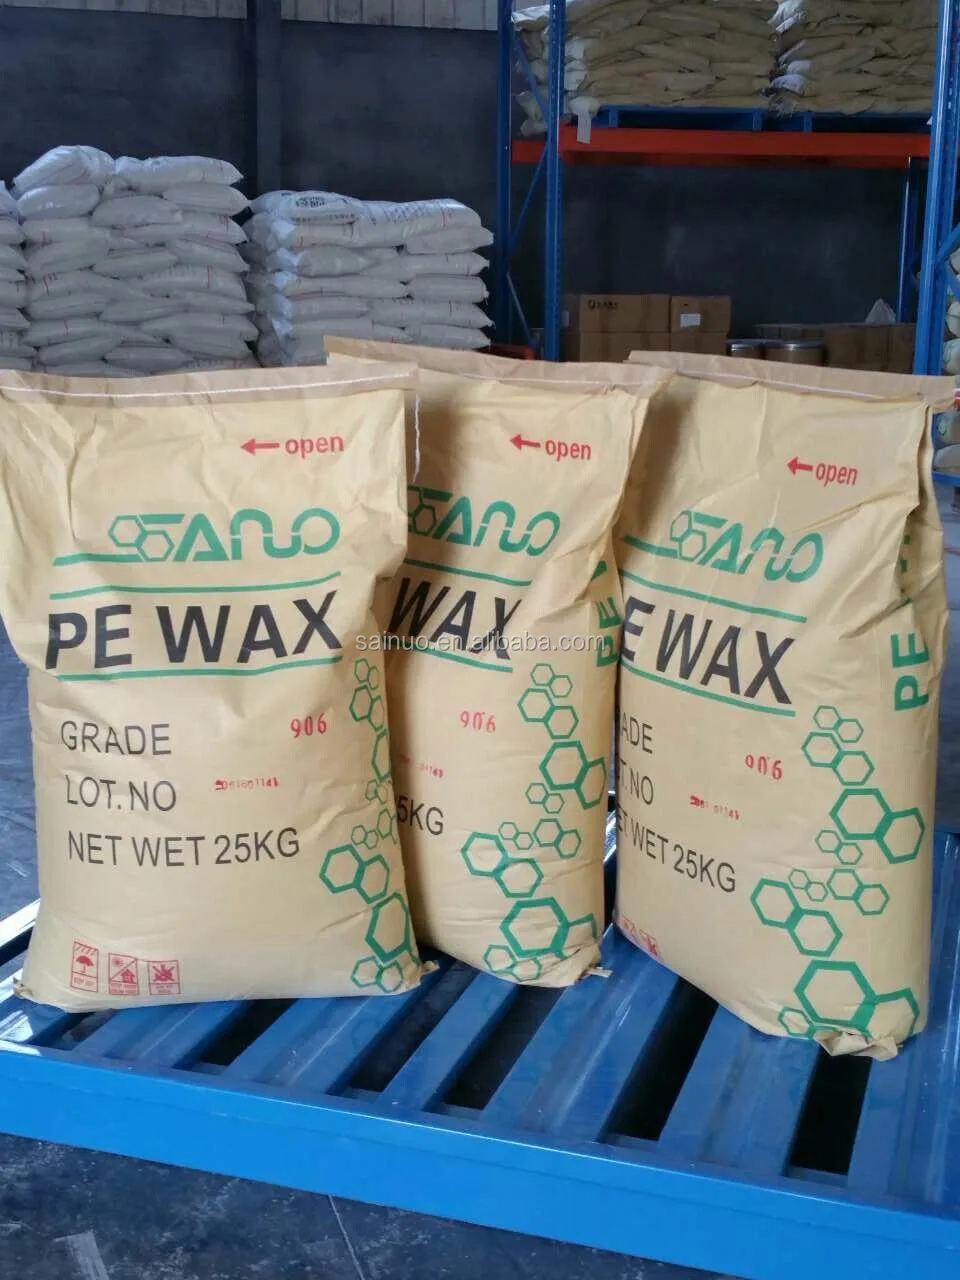 Sainuo High-quality polyethylene wax for road marking paint manufacturers for wax emulsions